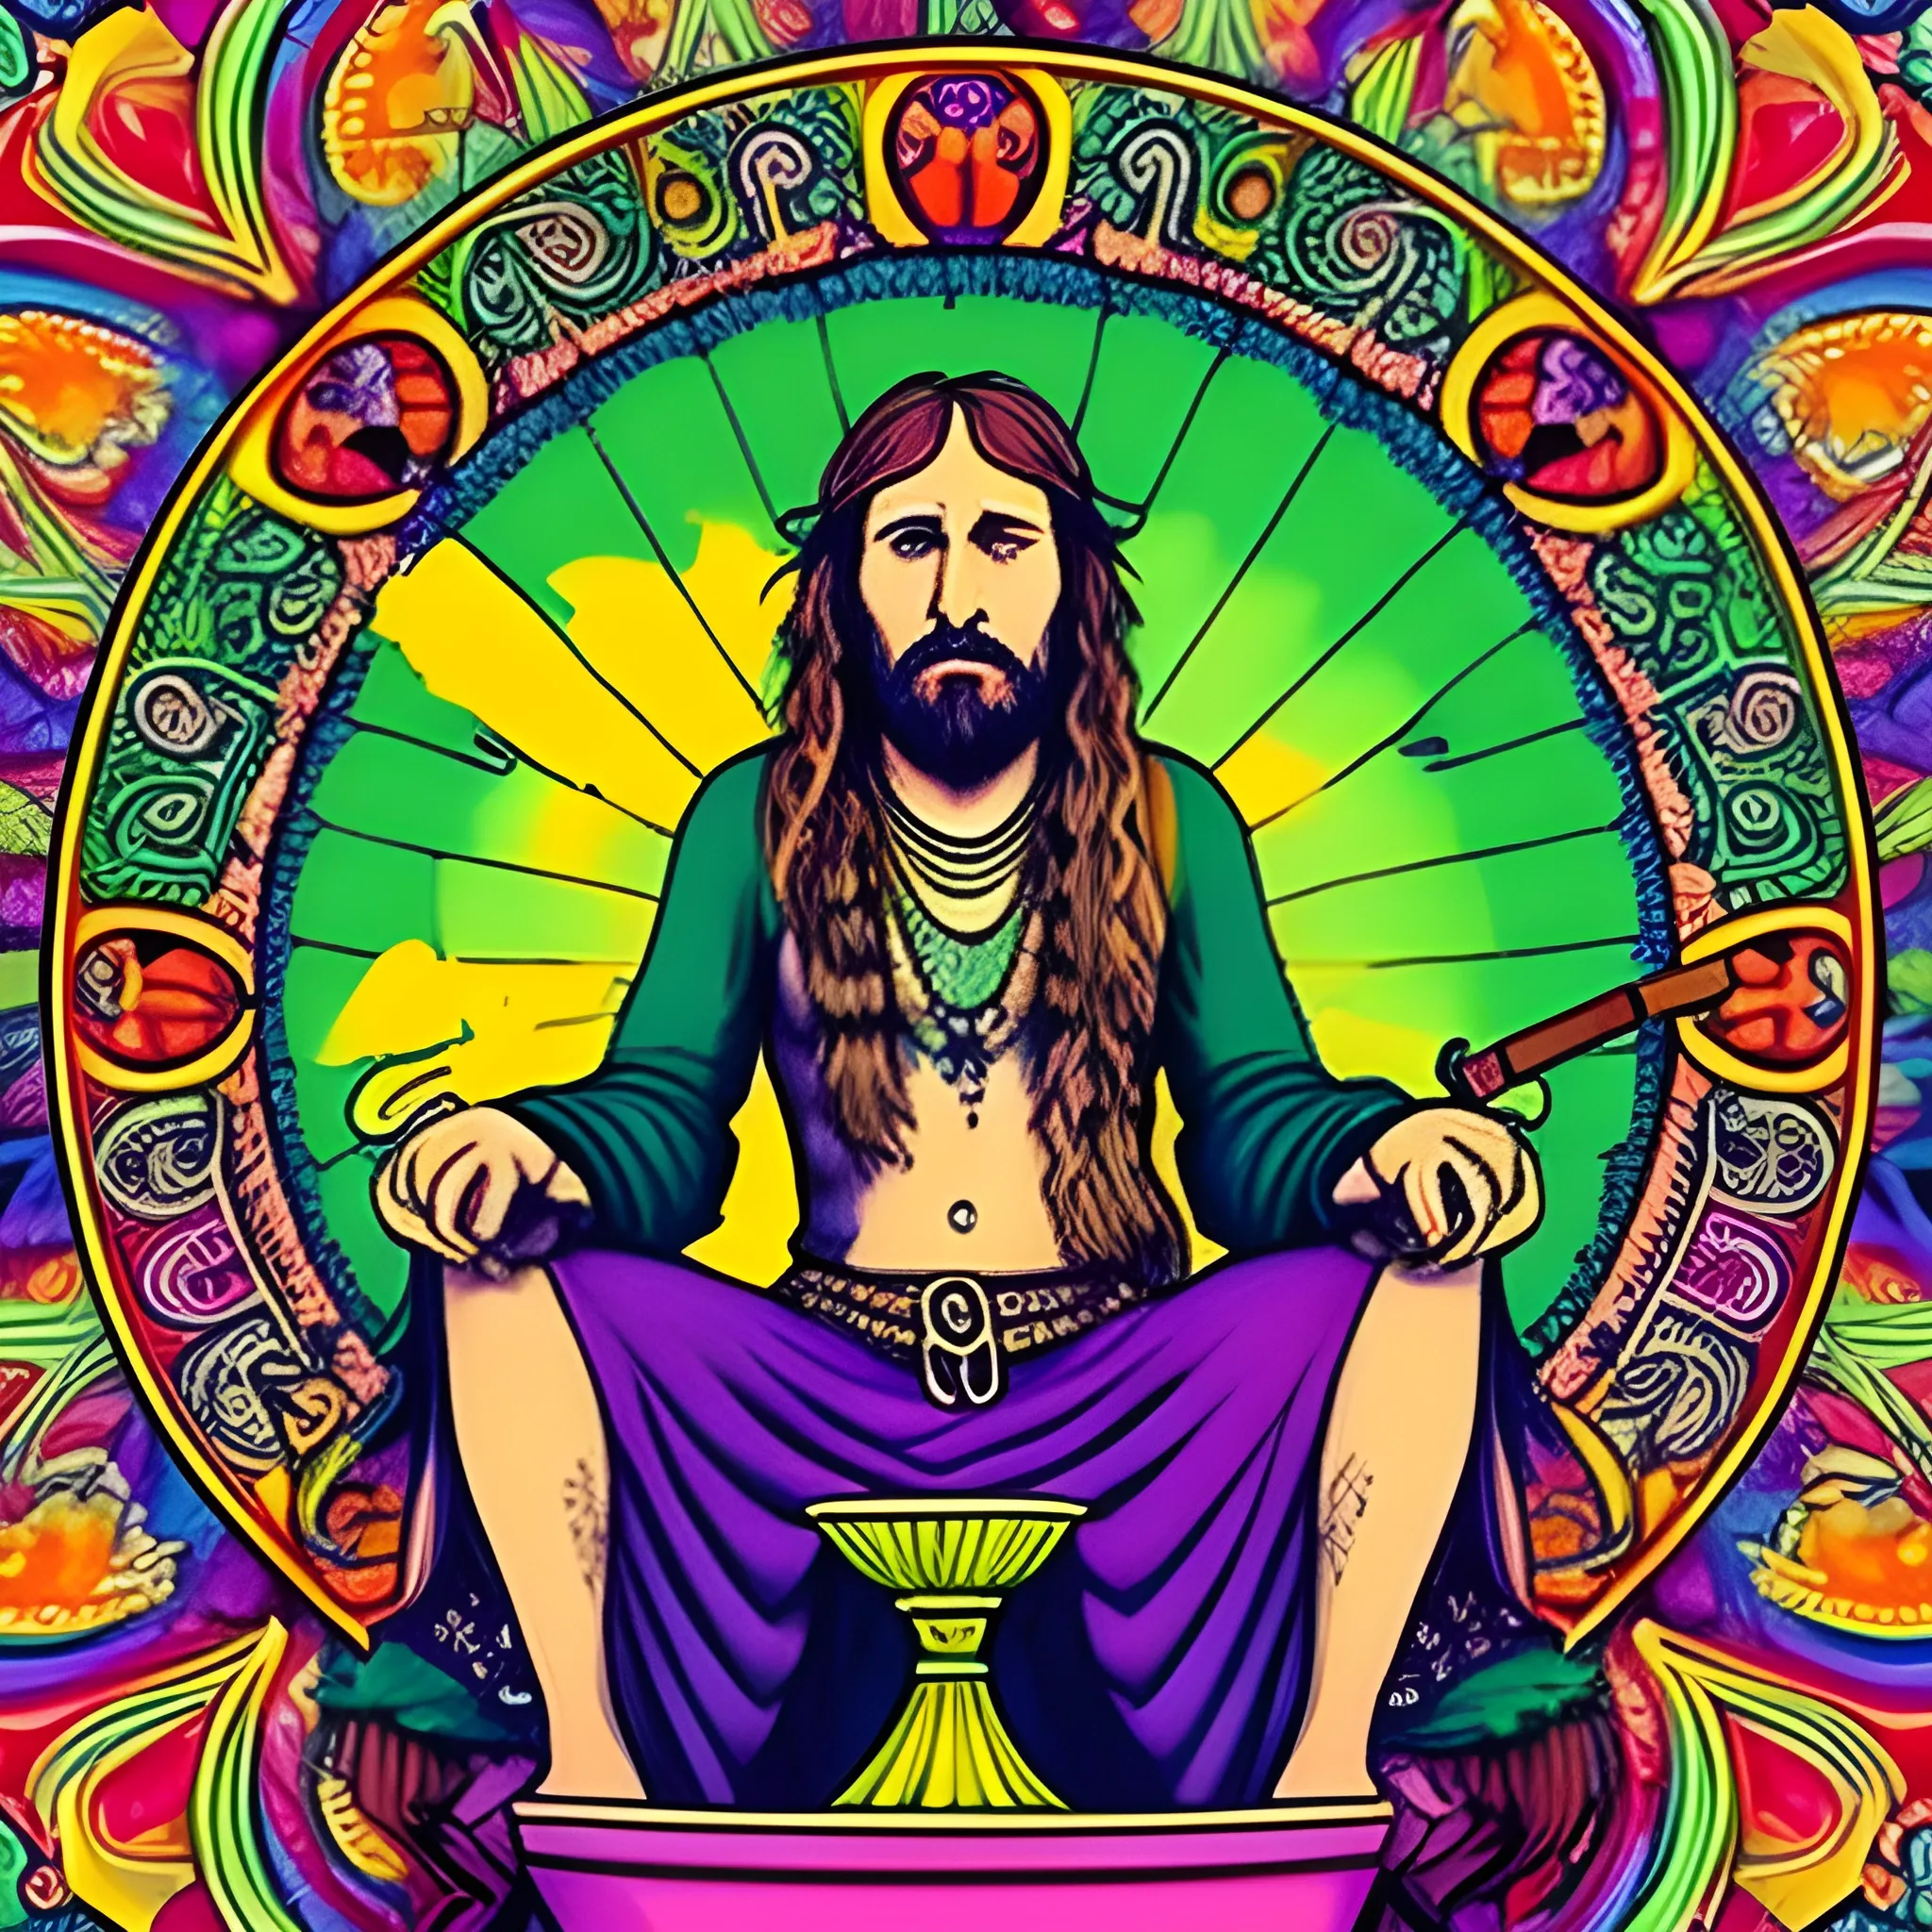 I want to see a Hippie sitting on a throan with him smoking a bowl , with a bunch of women around his throne , Trippy